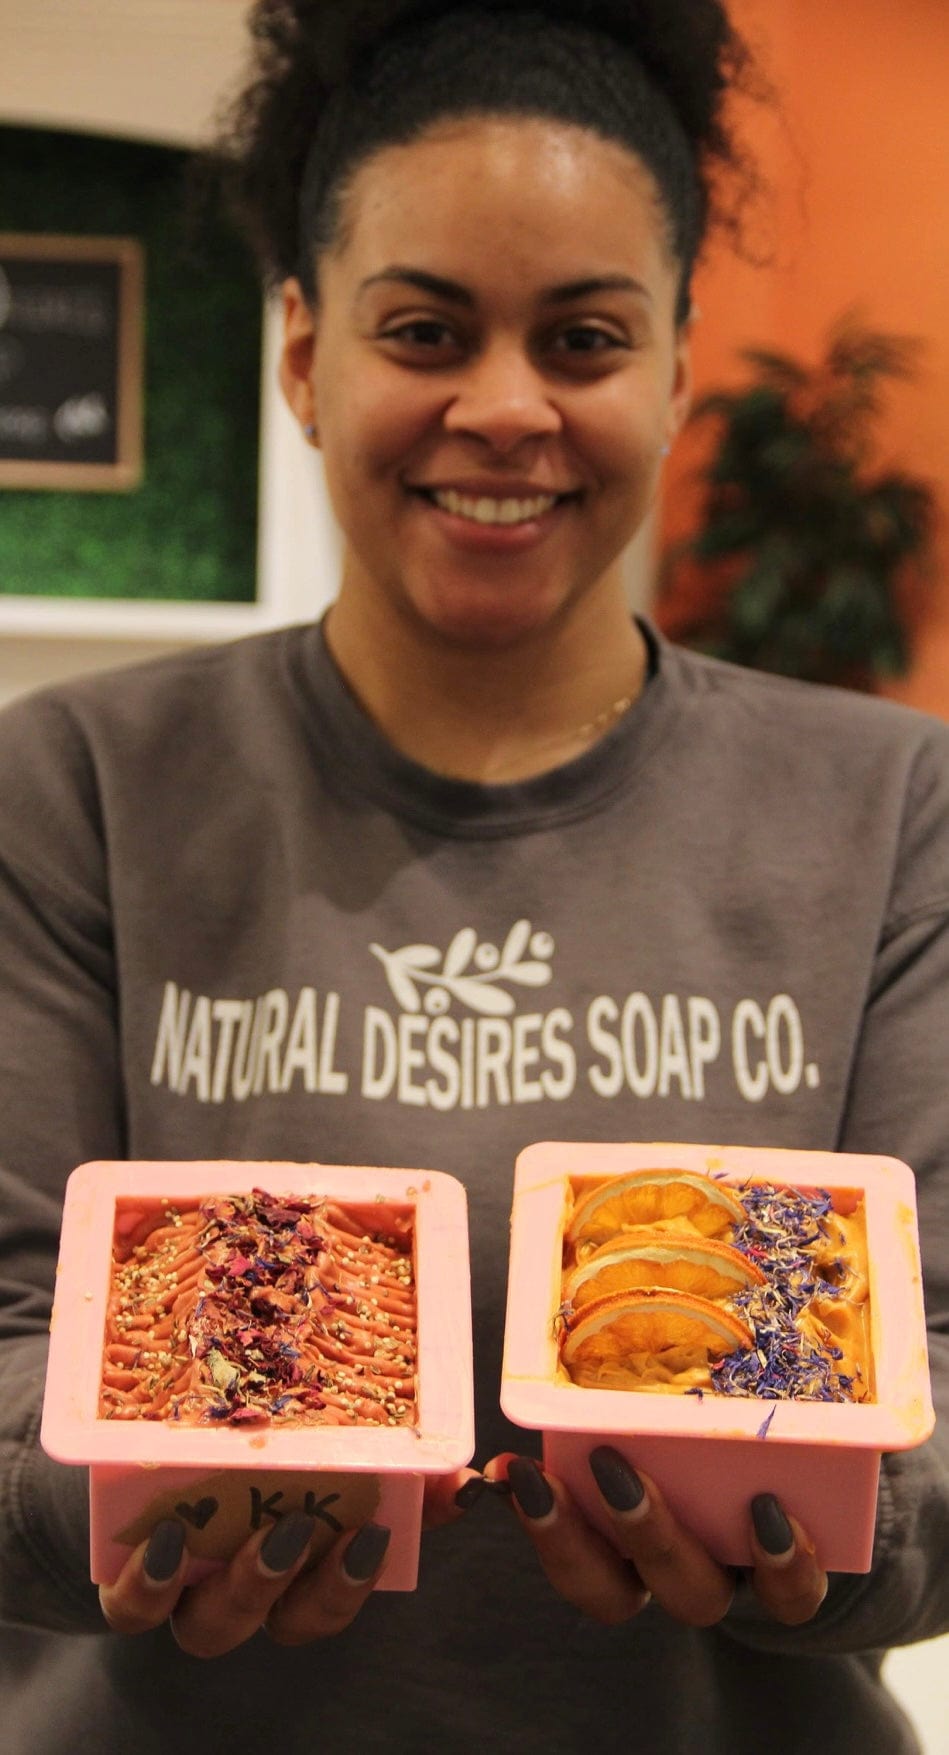 Soap Making Class May 5th 2:00 pm